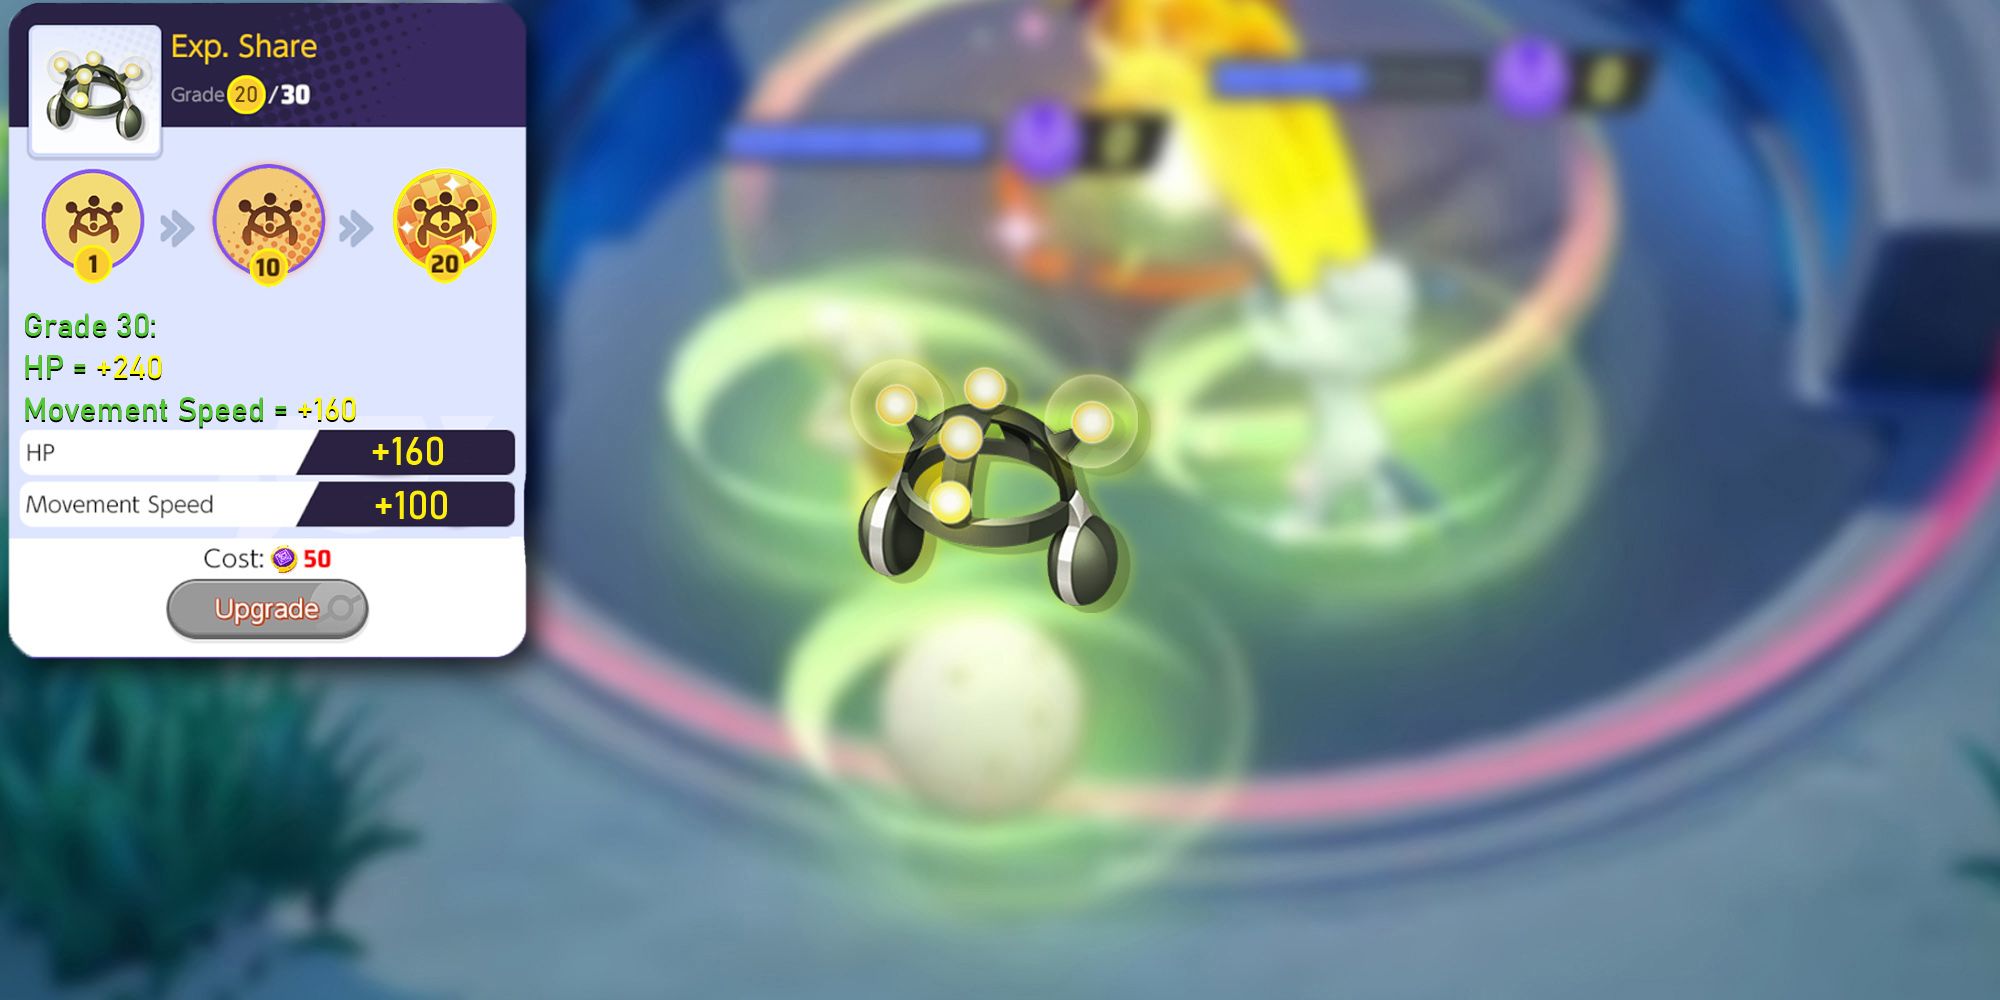 Pokemon Unite - PNG and Cutout of EXP Share Overlaid On Blurred Image Of Eldegoss Using Abilities Near Zapdos